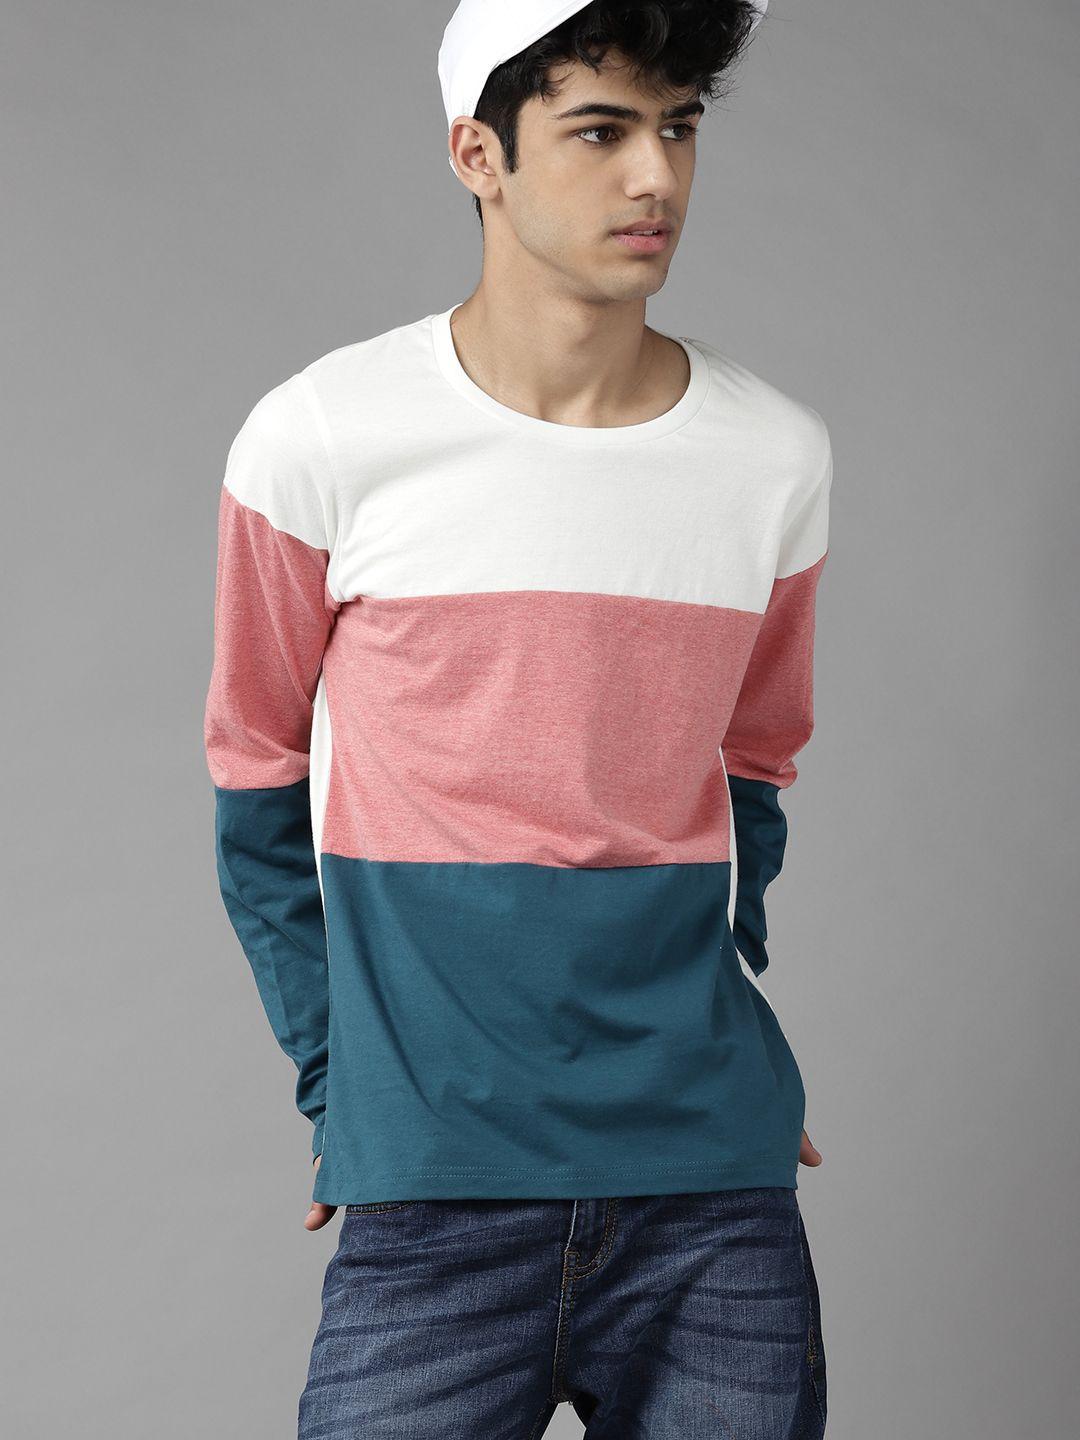 uth by roadster boys white & coral pink colourblocked pure cotton t-shirt